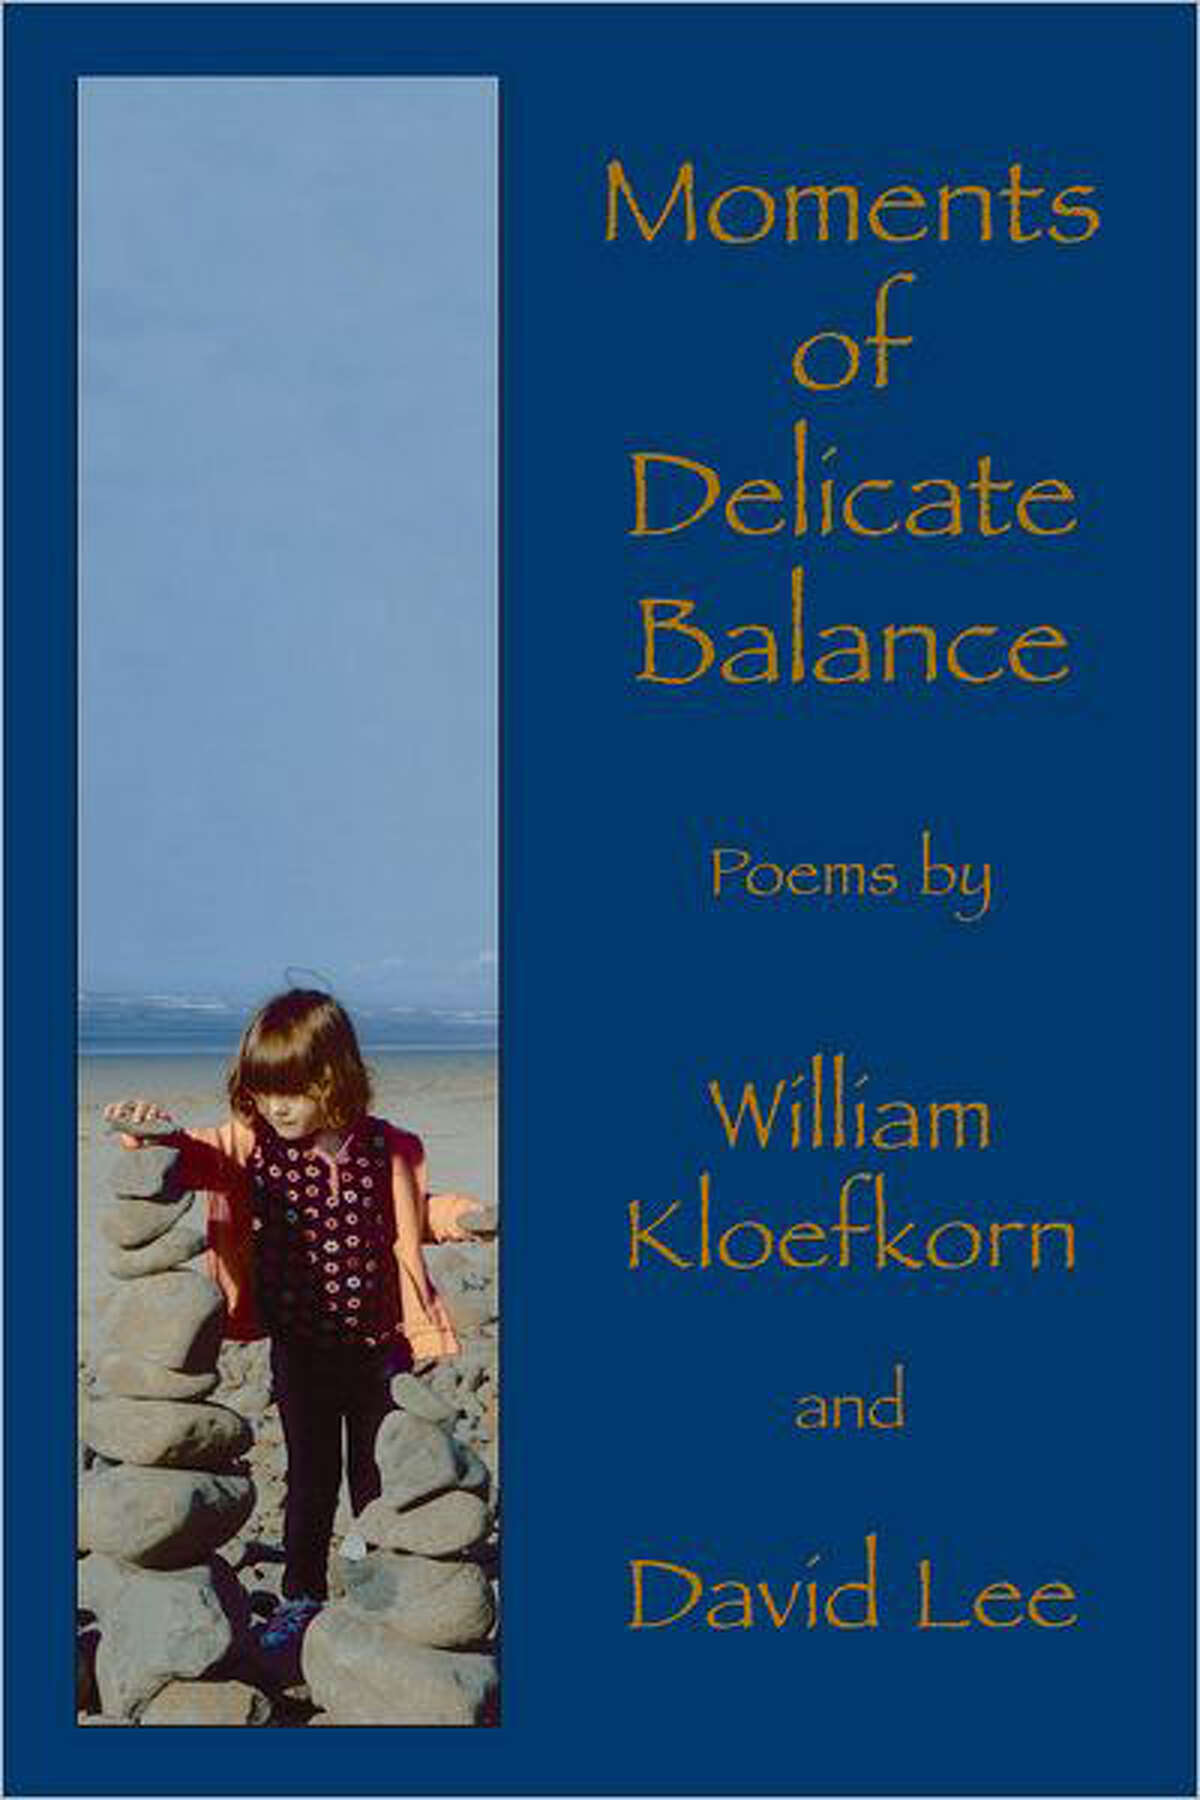 "Moments of Delicate Balance" poems by William Kloefkorn and David Lee for poetic diversity